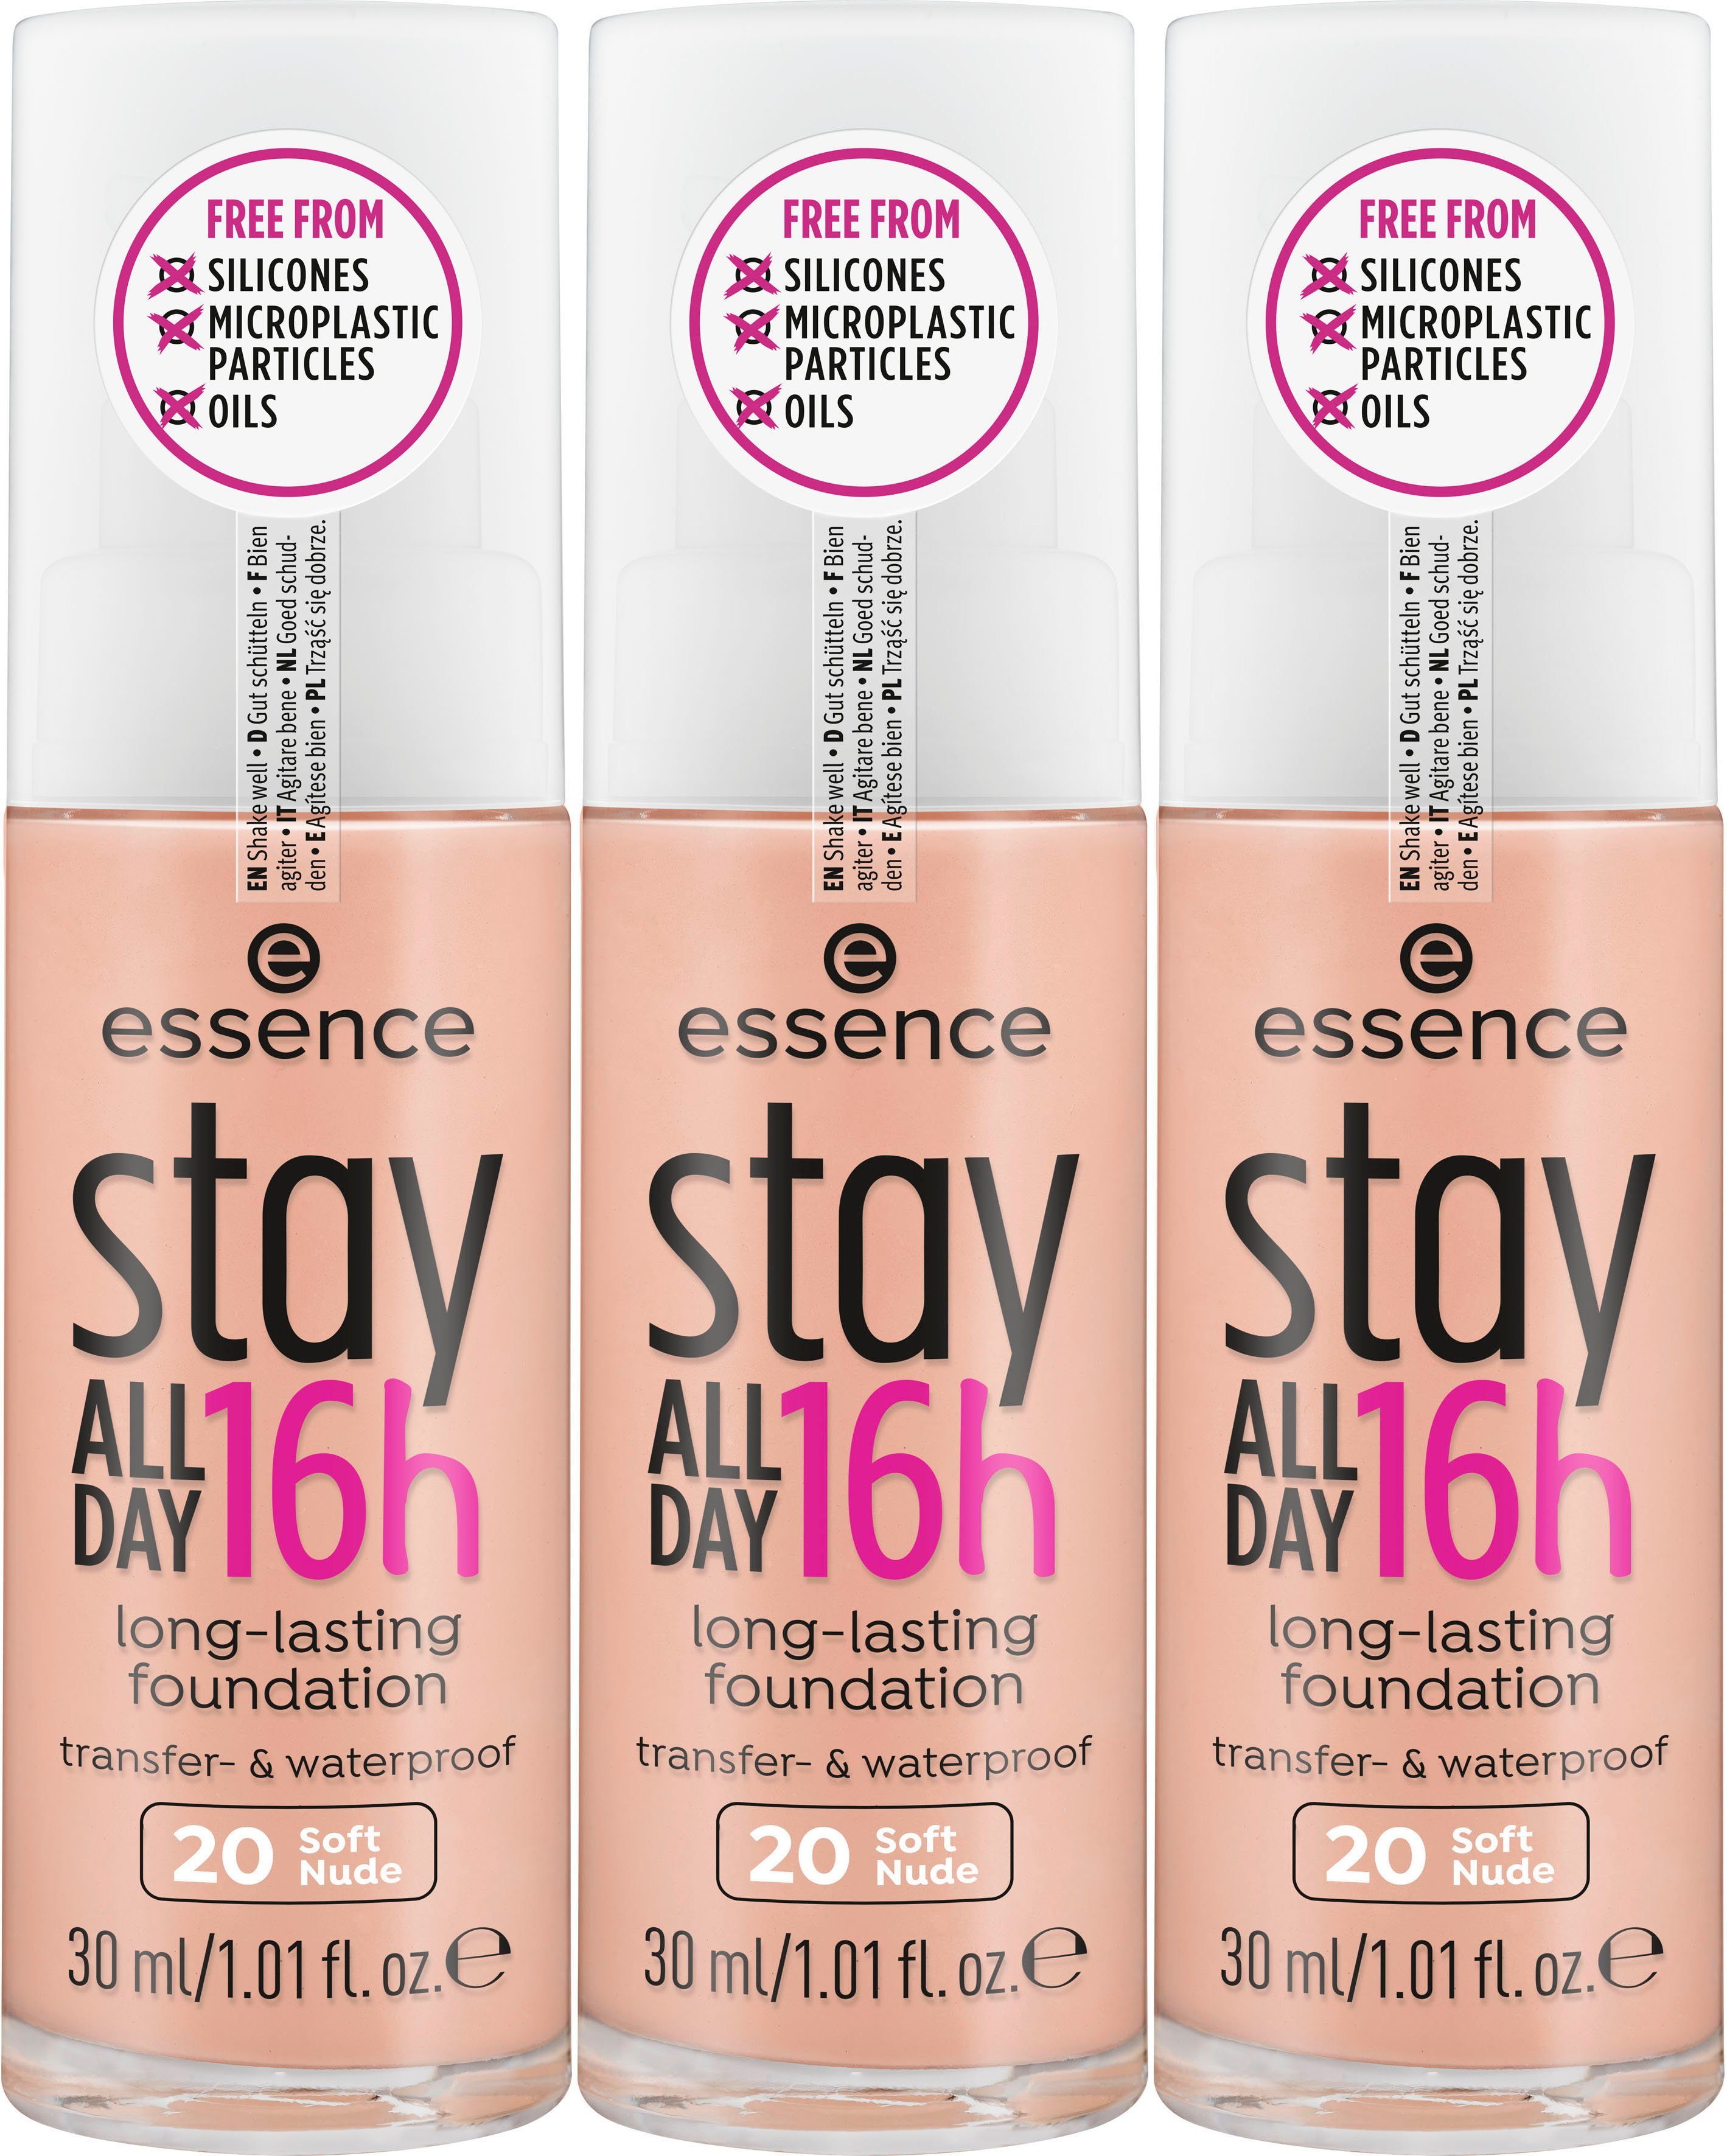 Essence Foundation stay ALL DAY 16h long-lasting,